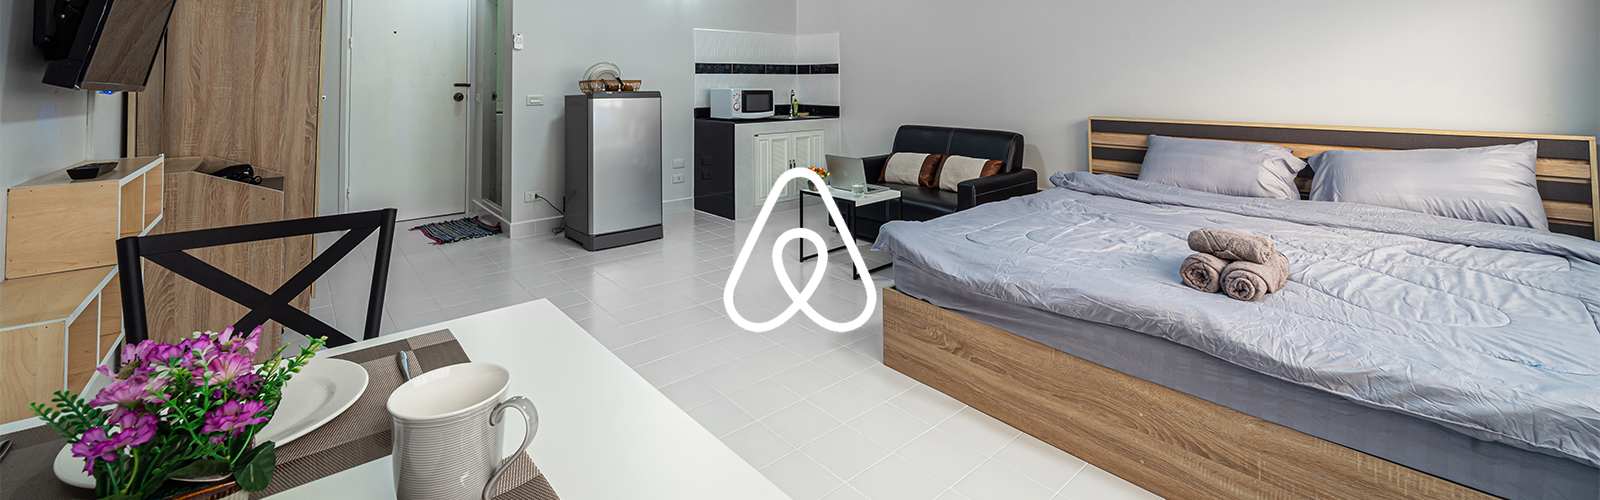 Toronto Kills AirBNB Condos With 3 New Rules Banner